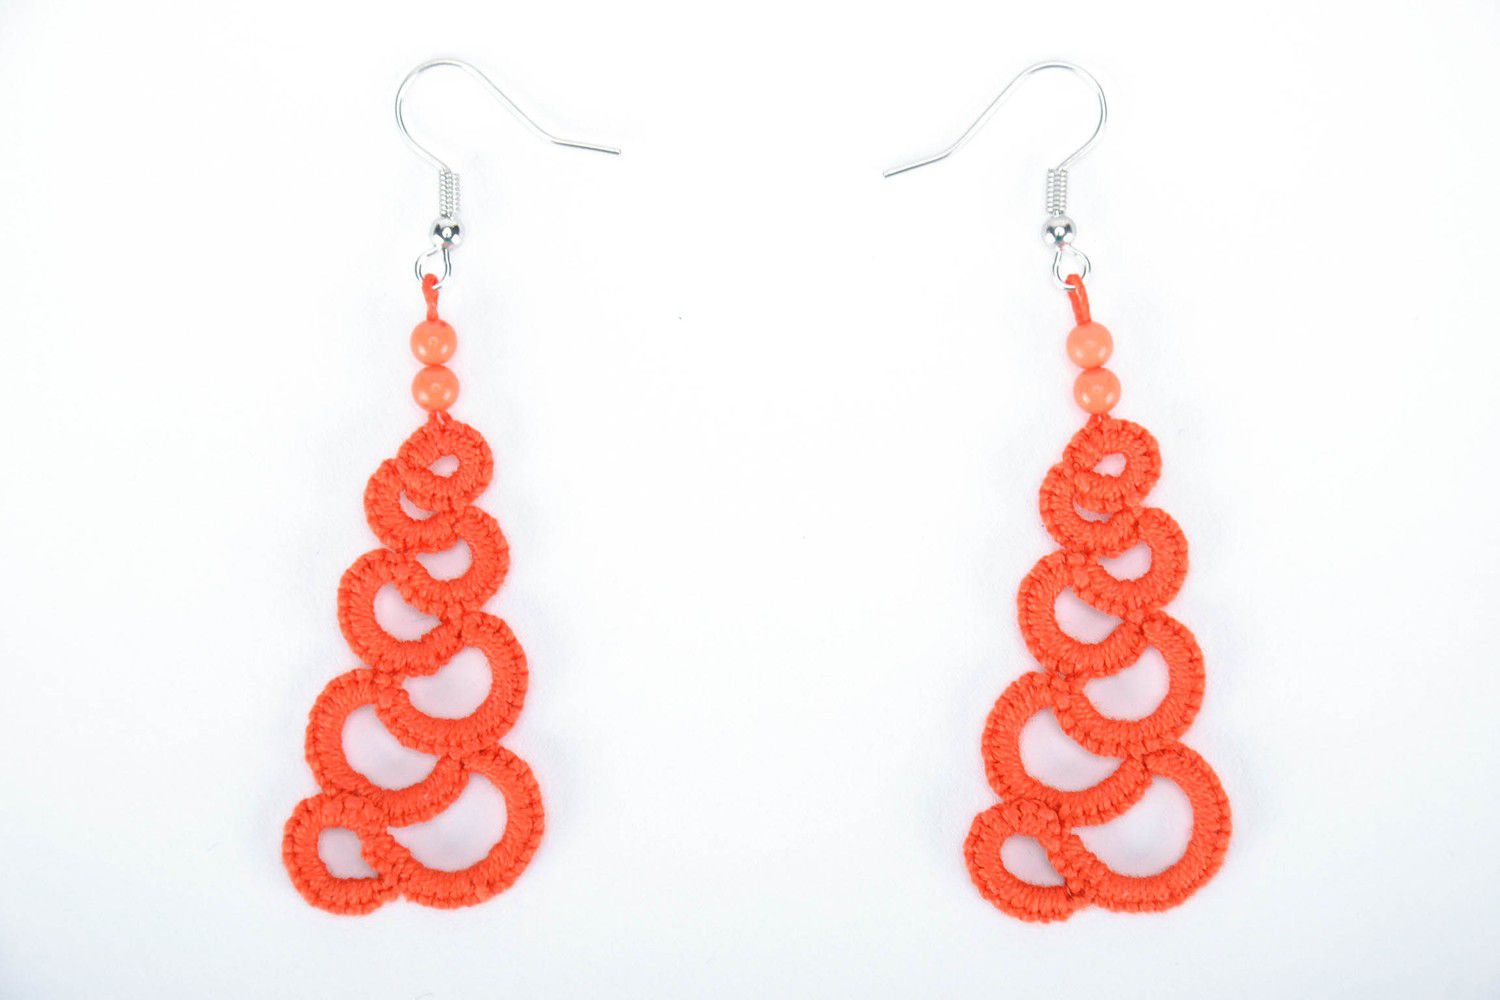 Coral earrings made from woven lace photo 1